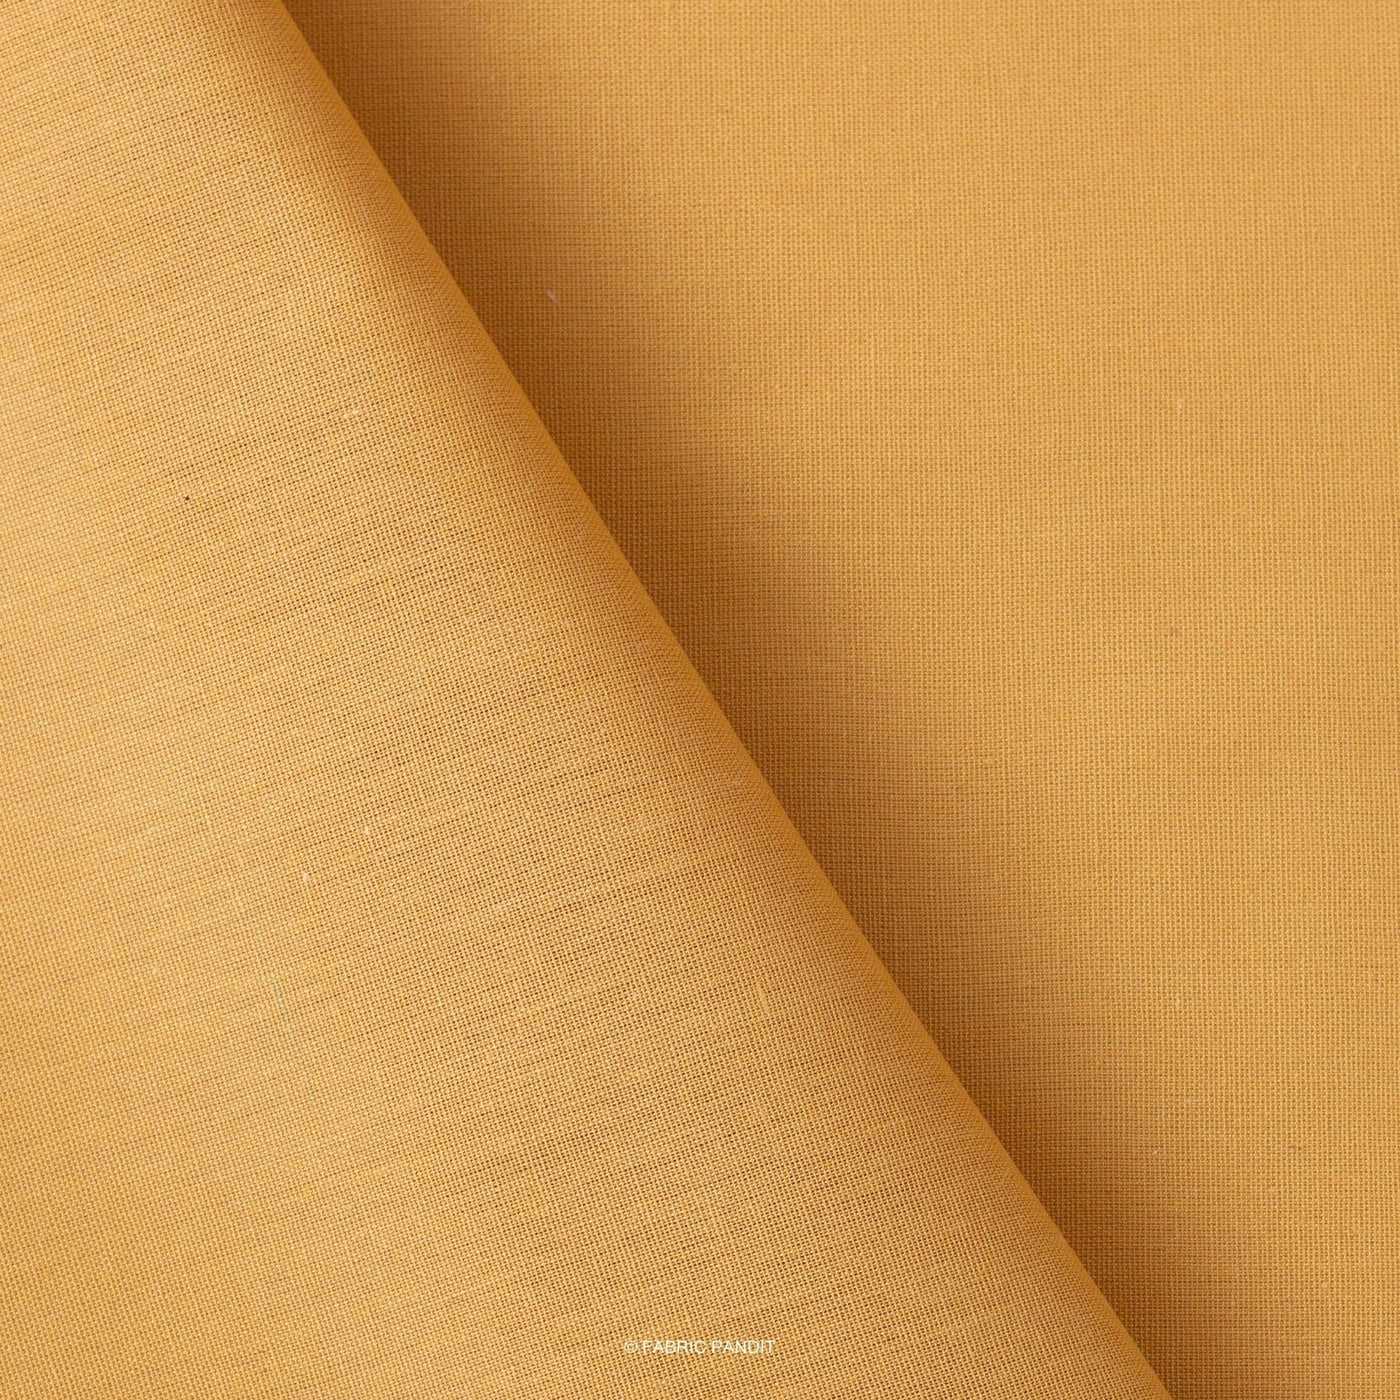 Fabric Pandit Fabric Golden Sand Color Pure Cotton Linen Fabric (Width 42 Inches)